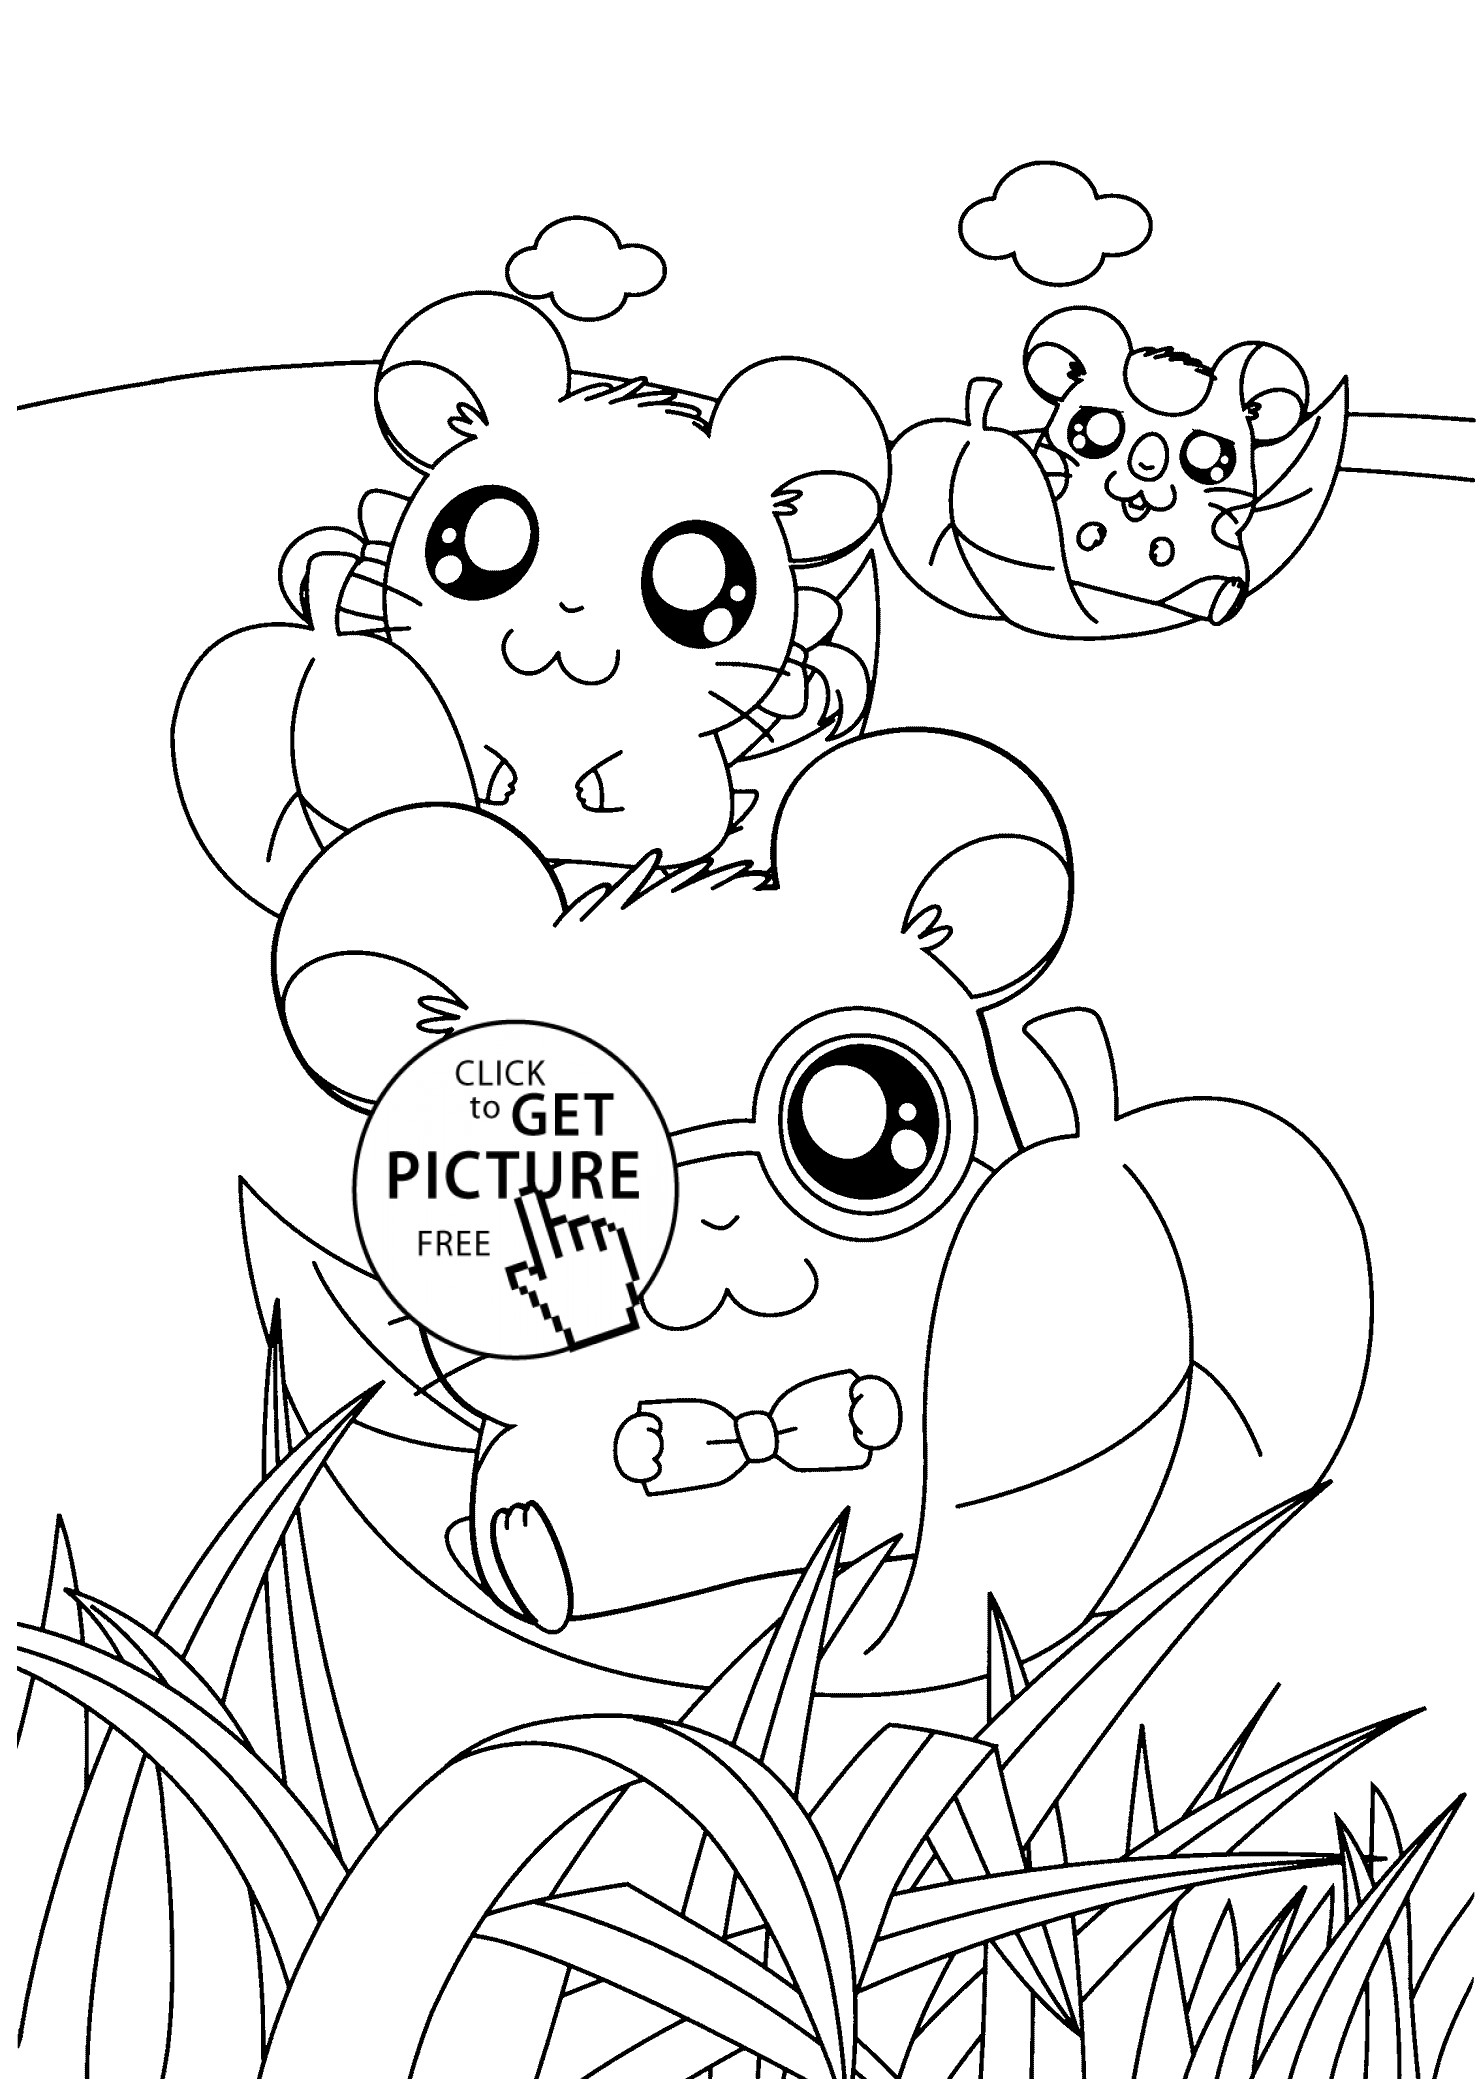 Manga Coloring Pages For Kids
 Hamtaro funny anime coloring pages for kids printable free